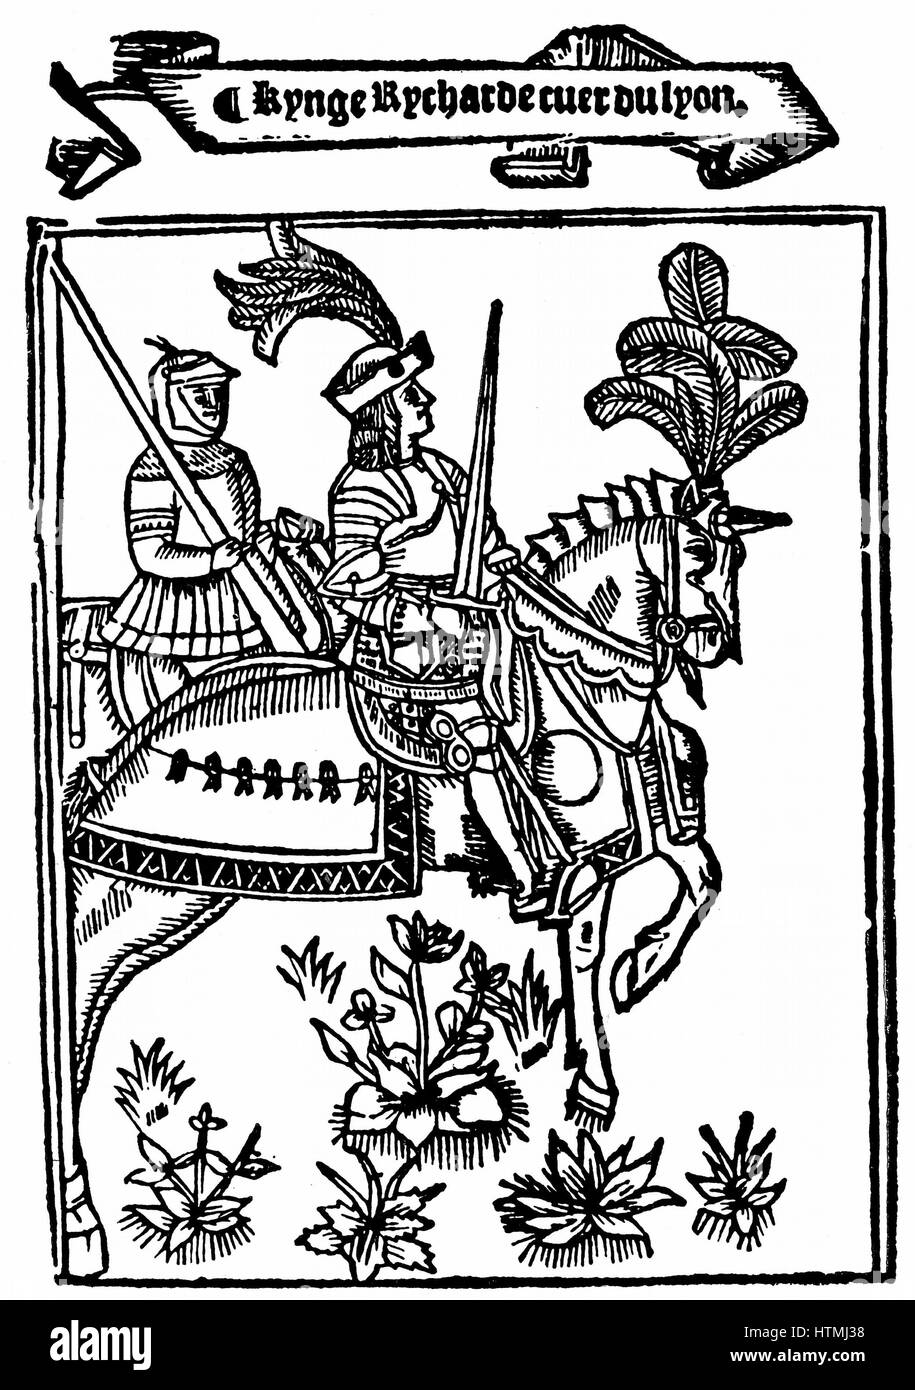 Richard I (1157-99) Coeur de Lion (Lionheart), king of England from 1189. From metrical romance 'Richard Coeur de Lion' printed by Wynkyn de Worde (dc1535), London, 1528. Woodcut showing Richard in armour mounted on caparisoned horse. Stock Photo